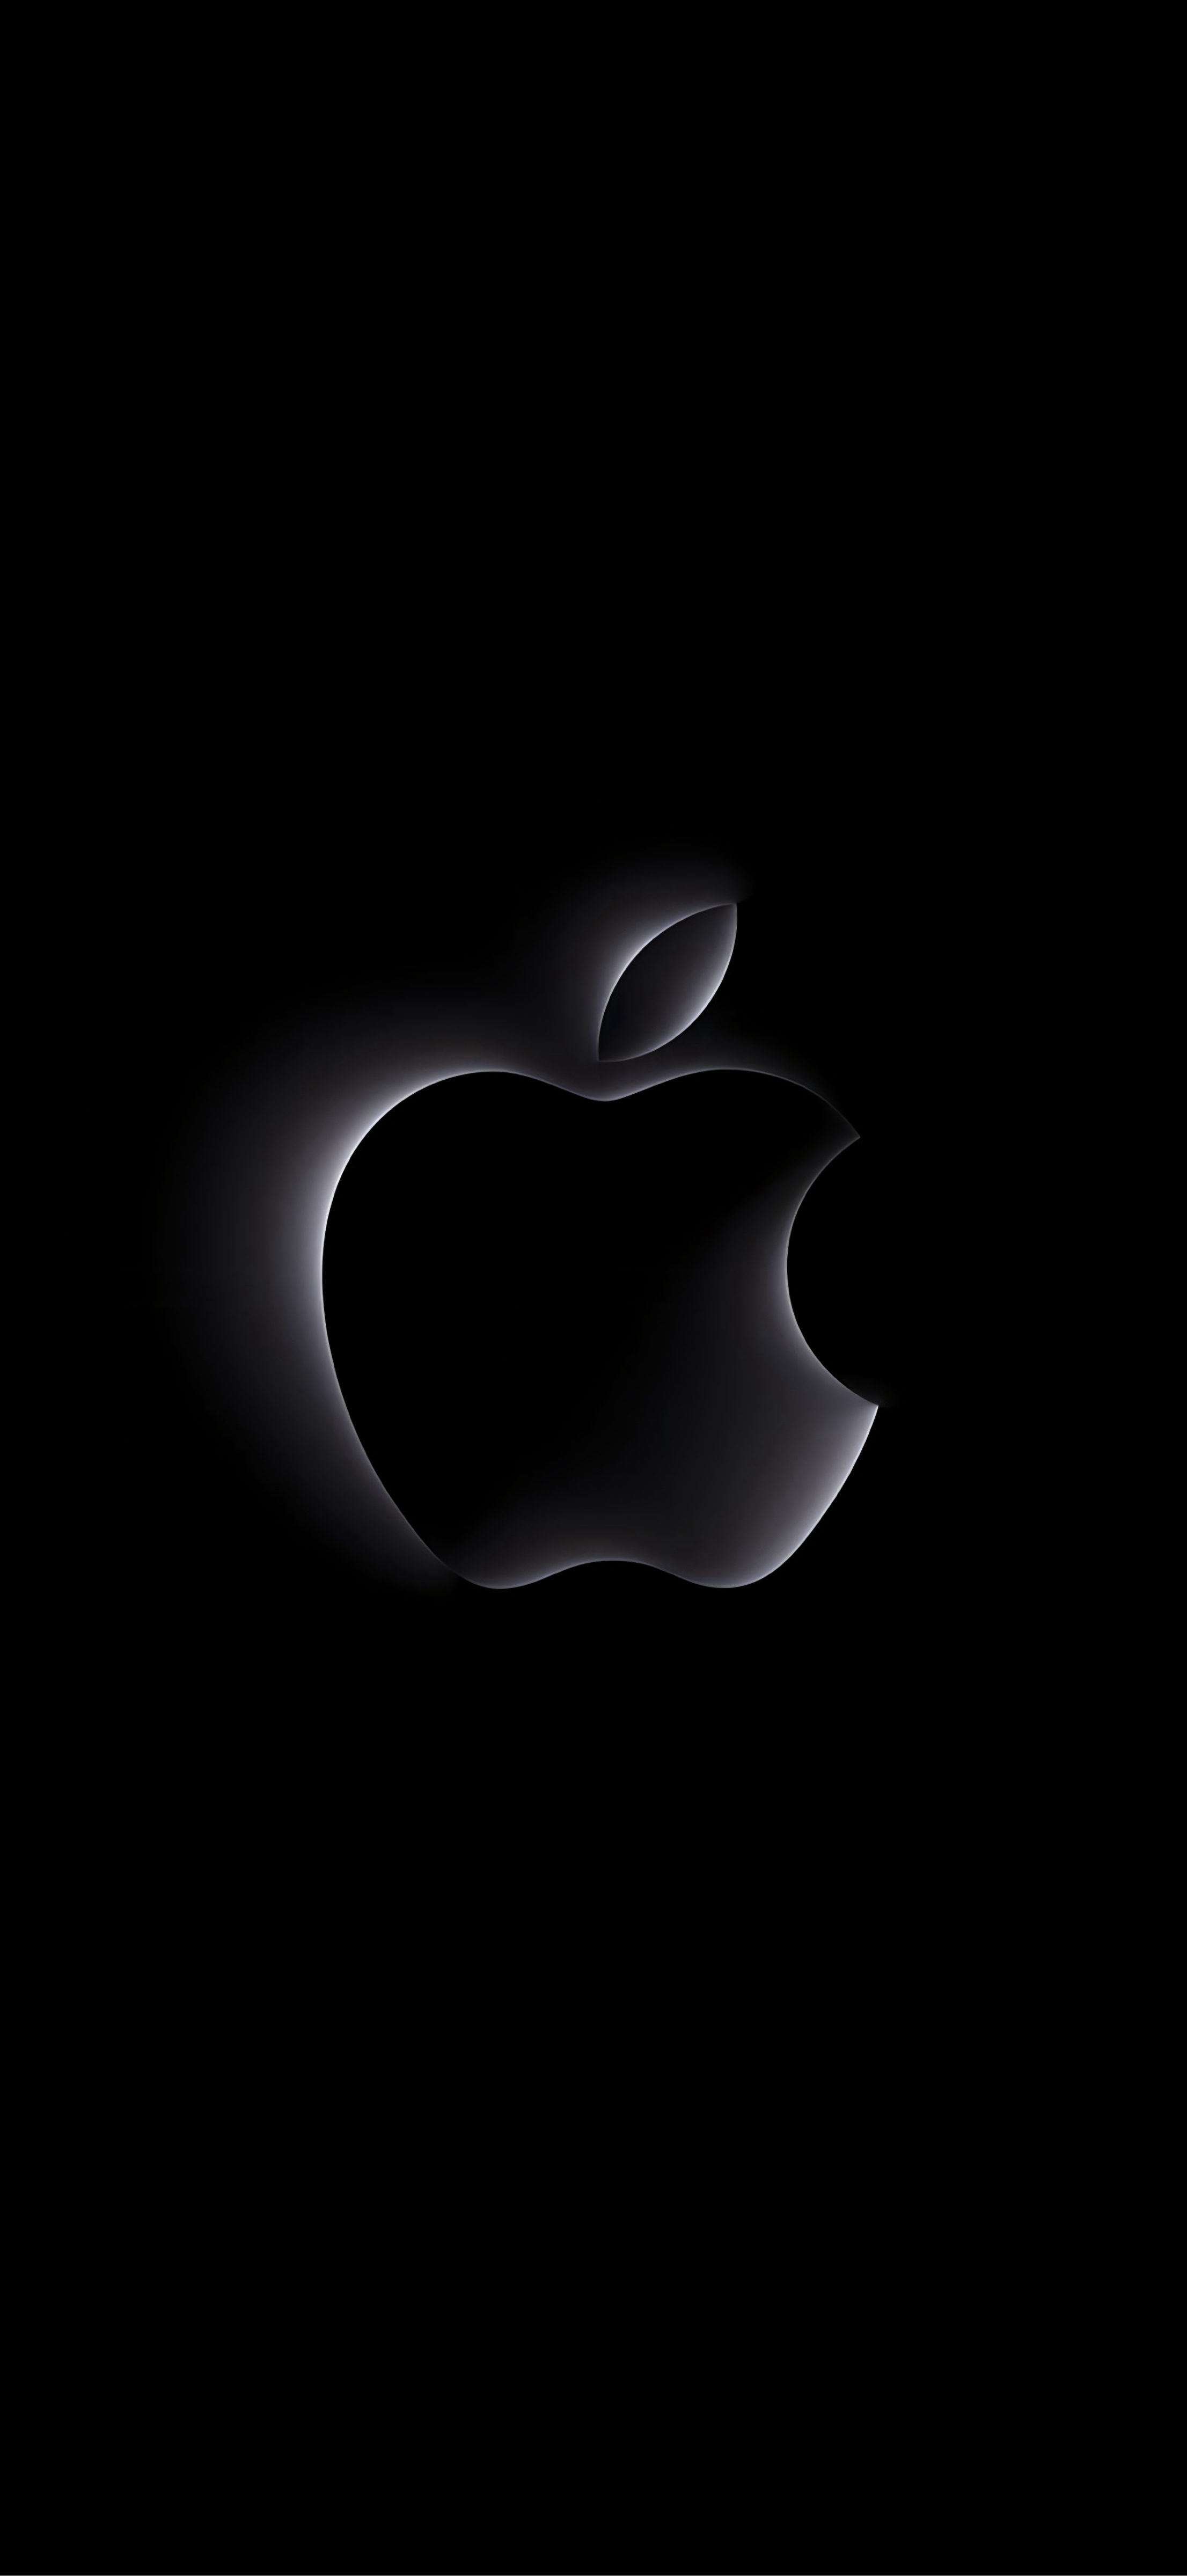 Apple Event - Scary Fast - Wallpapers Central